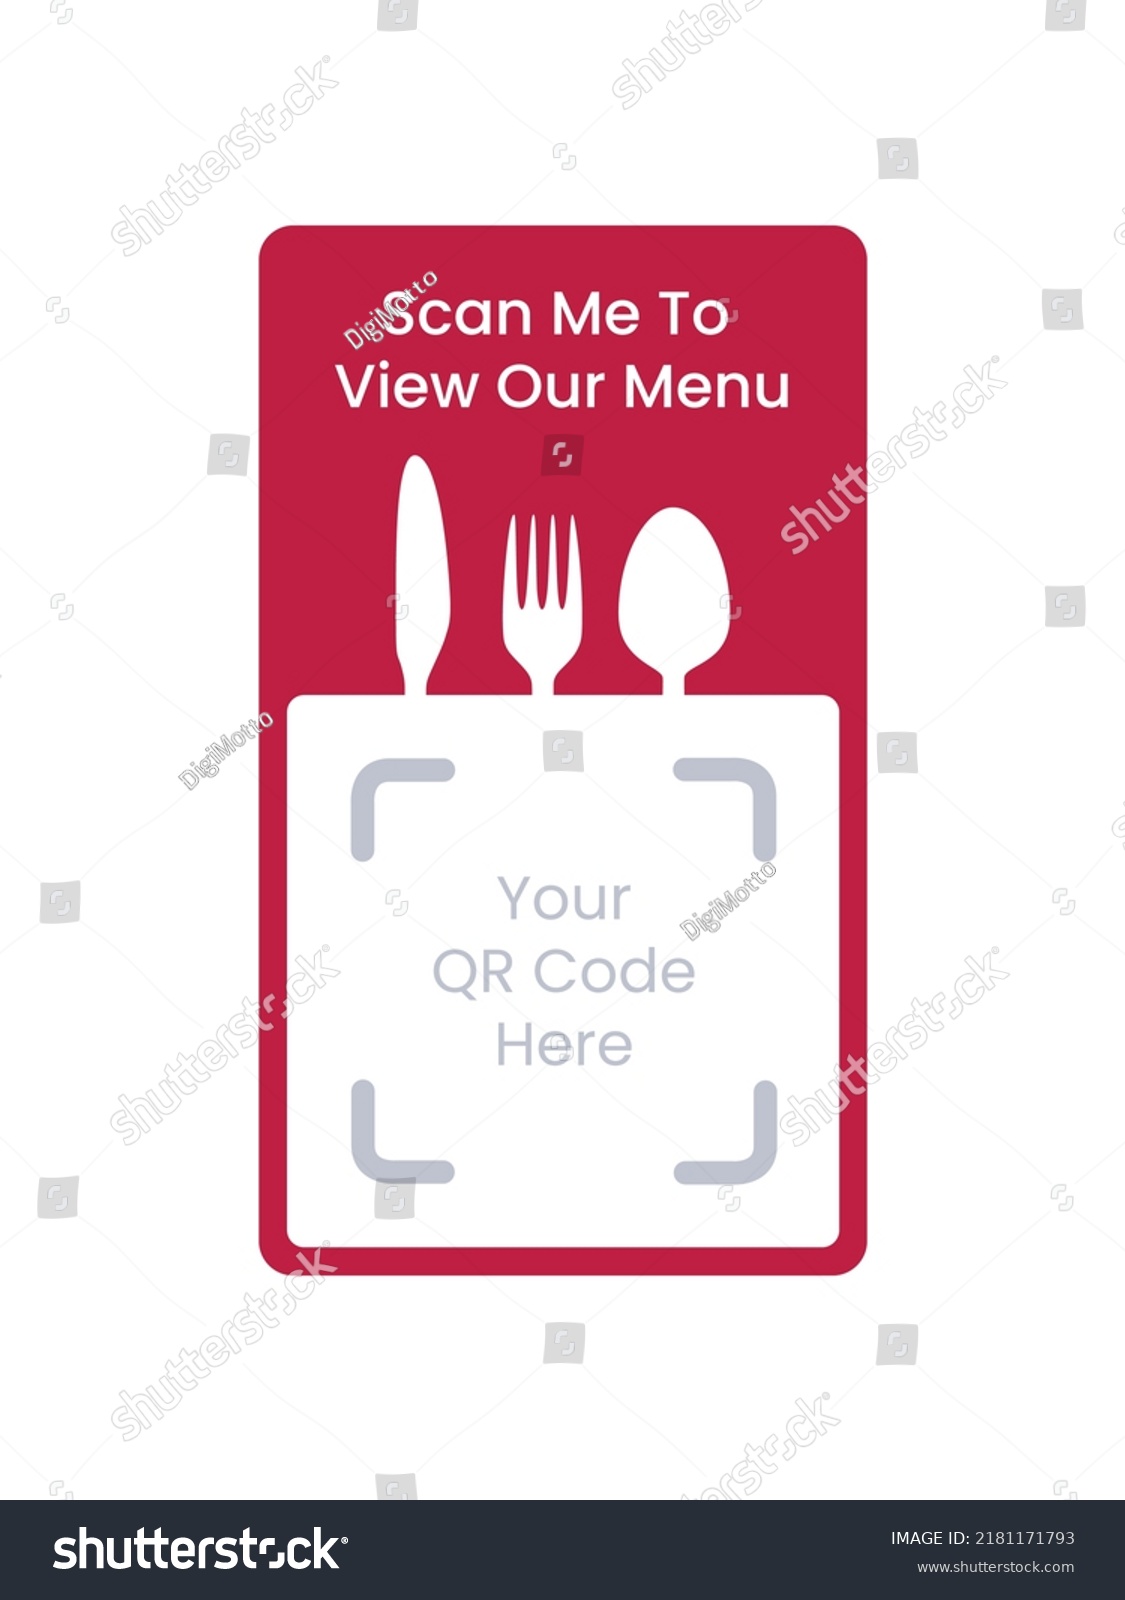 SVG of Scan me to view our menu. Restaurant menu QR code scan for menu order barcode. QR code menu icon for hotels, cafes, and bars to access culinary information. Template scan me Qr code for a smartphone. svg